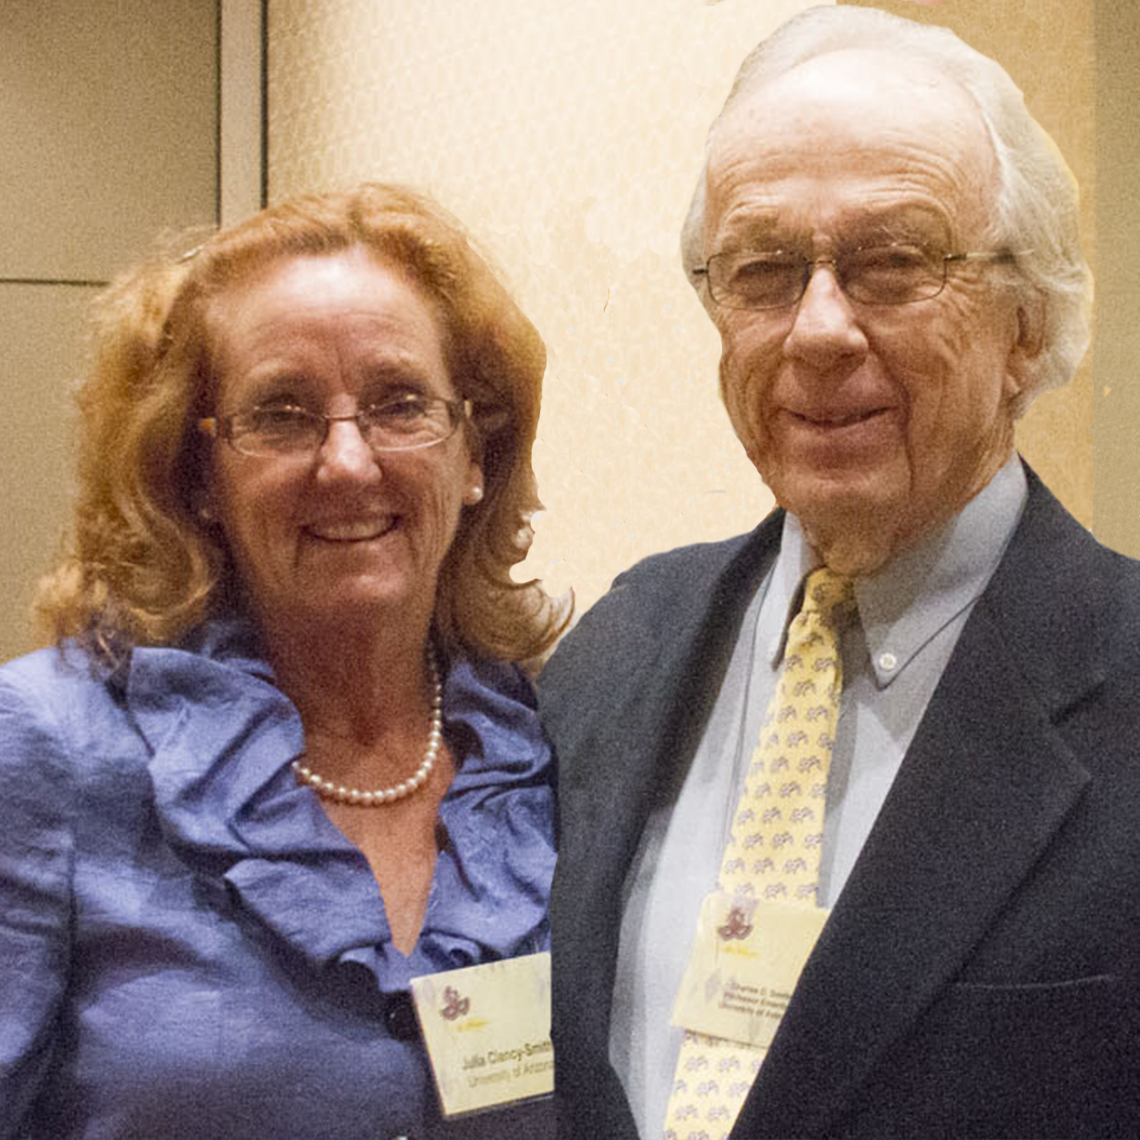 Julia Clancy-Smith and Charles D. Smith